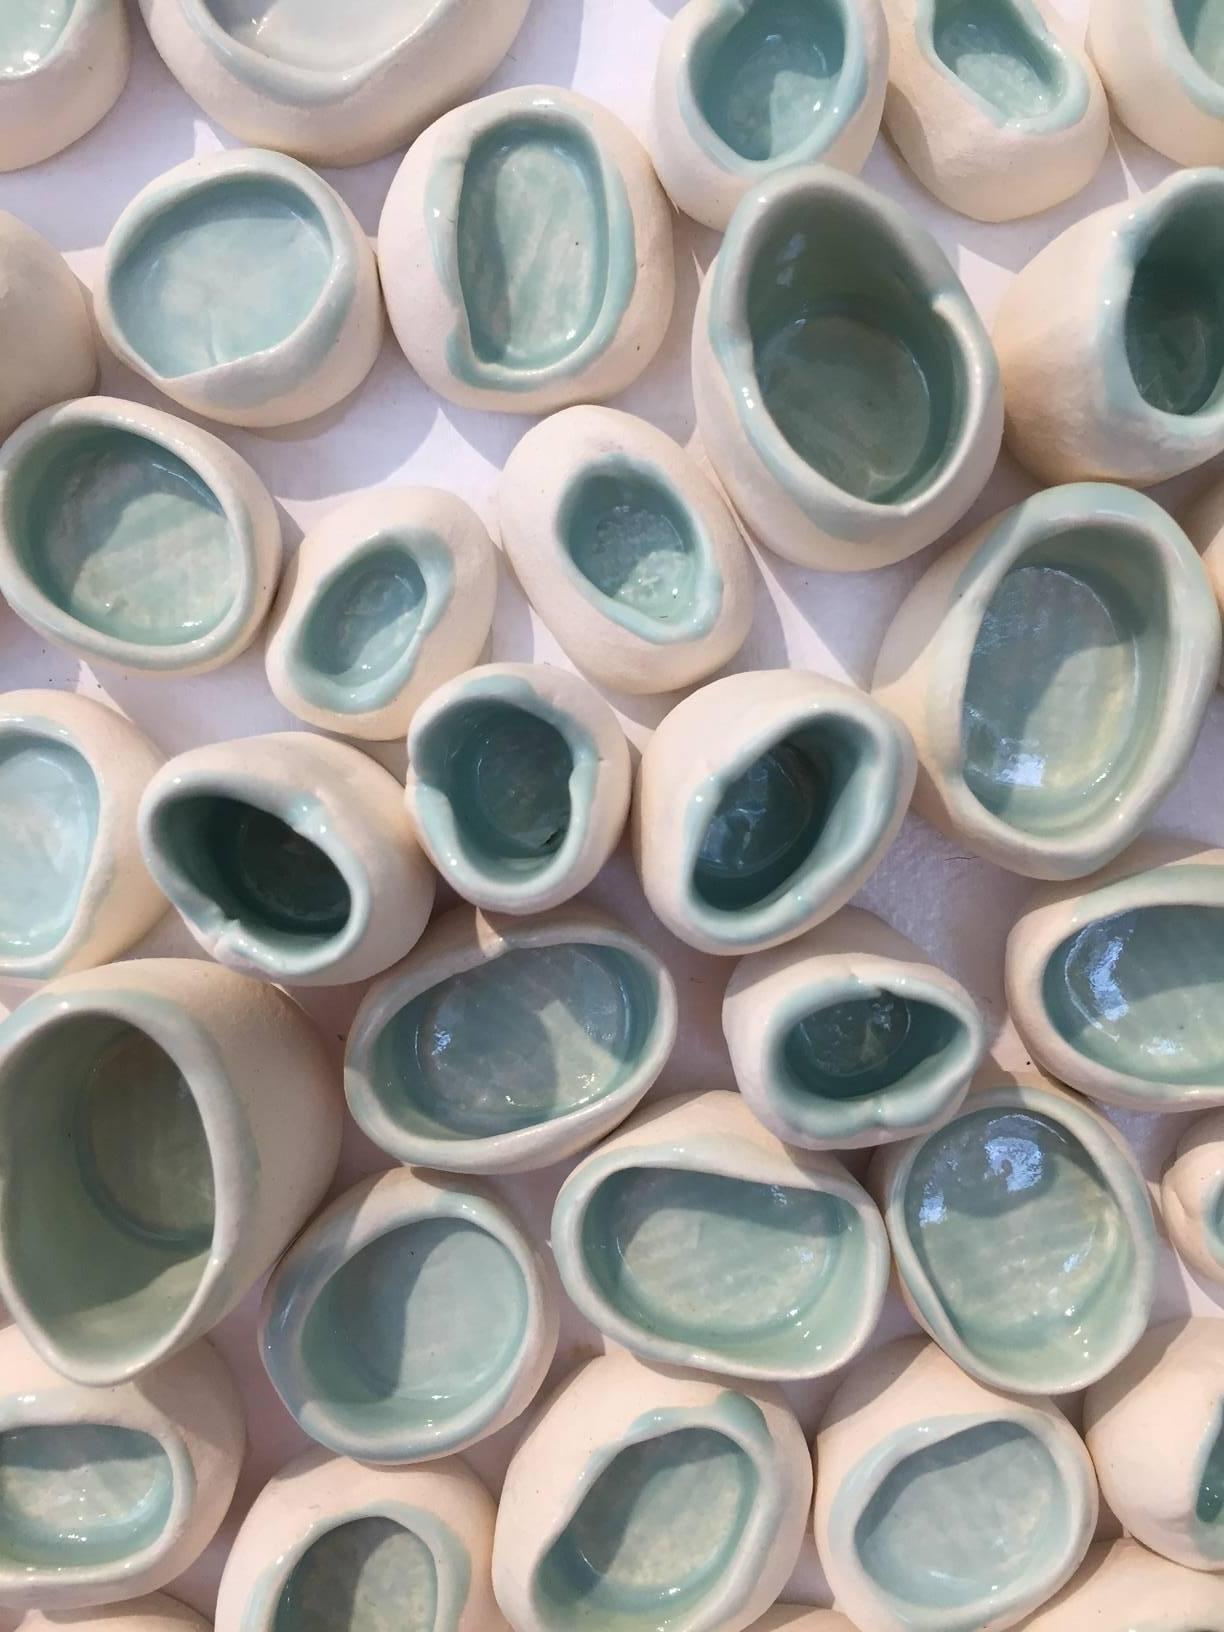 Celadon blue organic natural zen abstract ceramic wall sculpture from Pop Art pioneer Jane B. Grimm, who began her artistic career in the 1960’s, when her free-form sculptural jewelry exploded onto the fashion scene in NYC. Her designs spoke to a